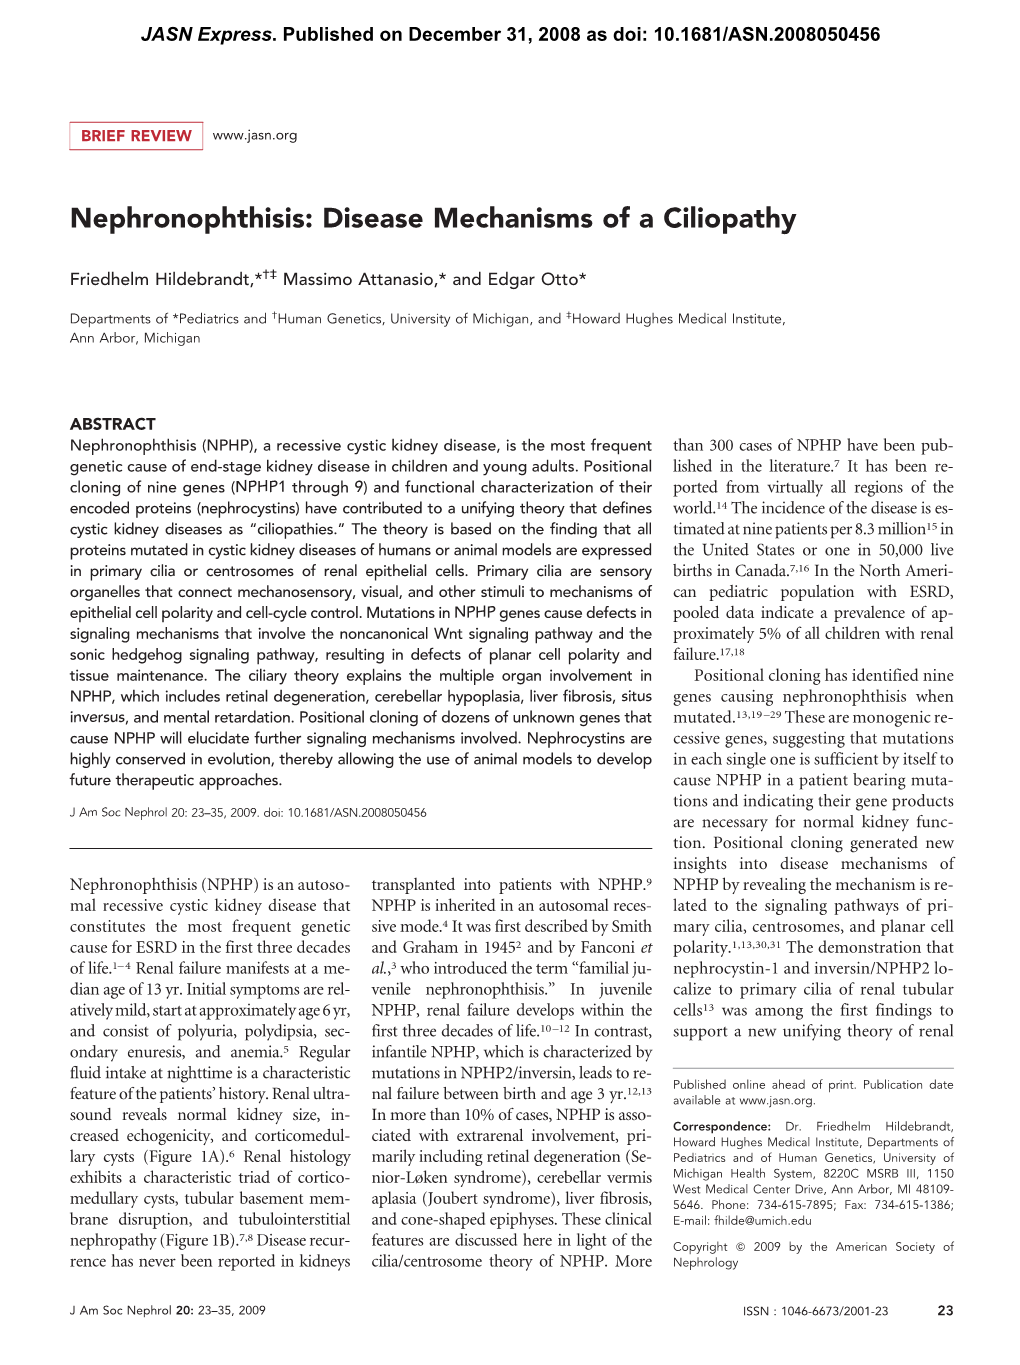 Nephronophthisis: Disease Mechanisms of a Ciliopathy